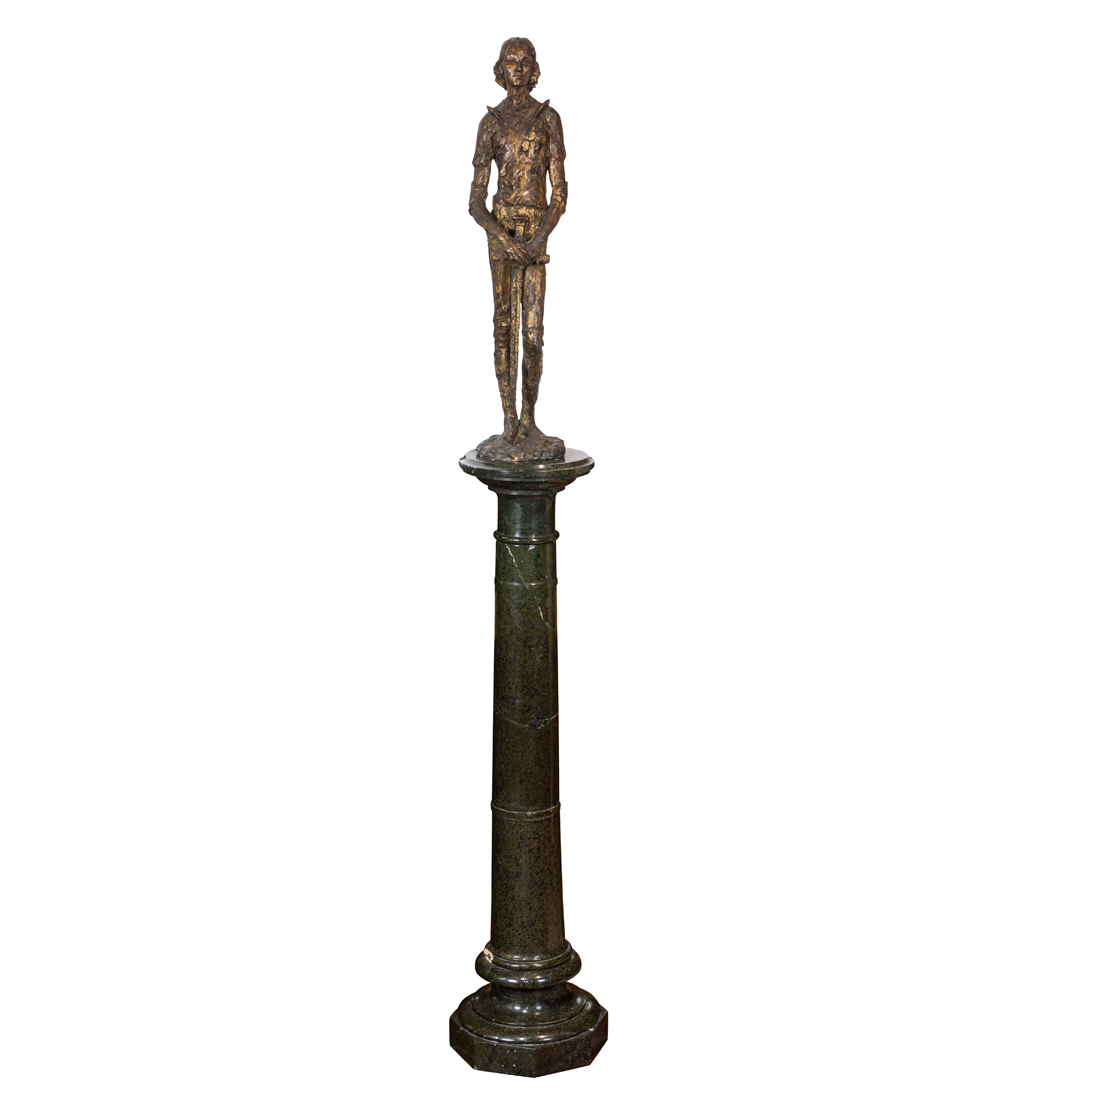 A PATINATED BRONZE FIGURE OF JOAN 3a1981